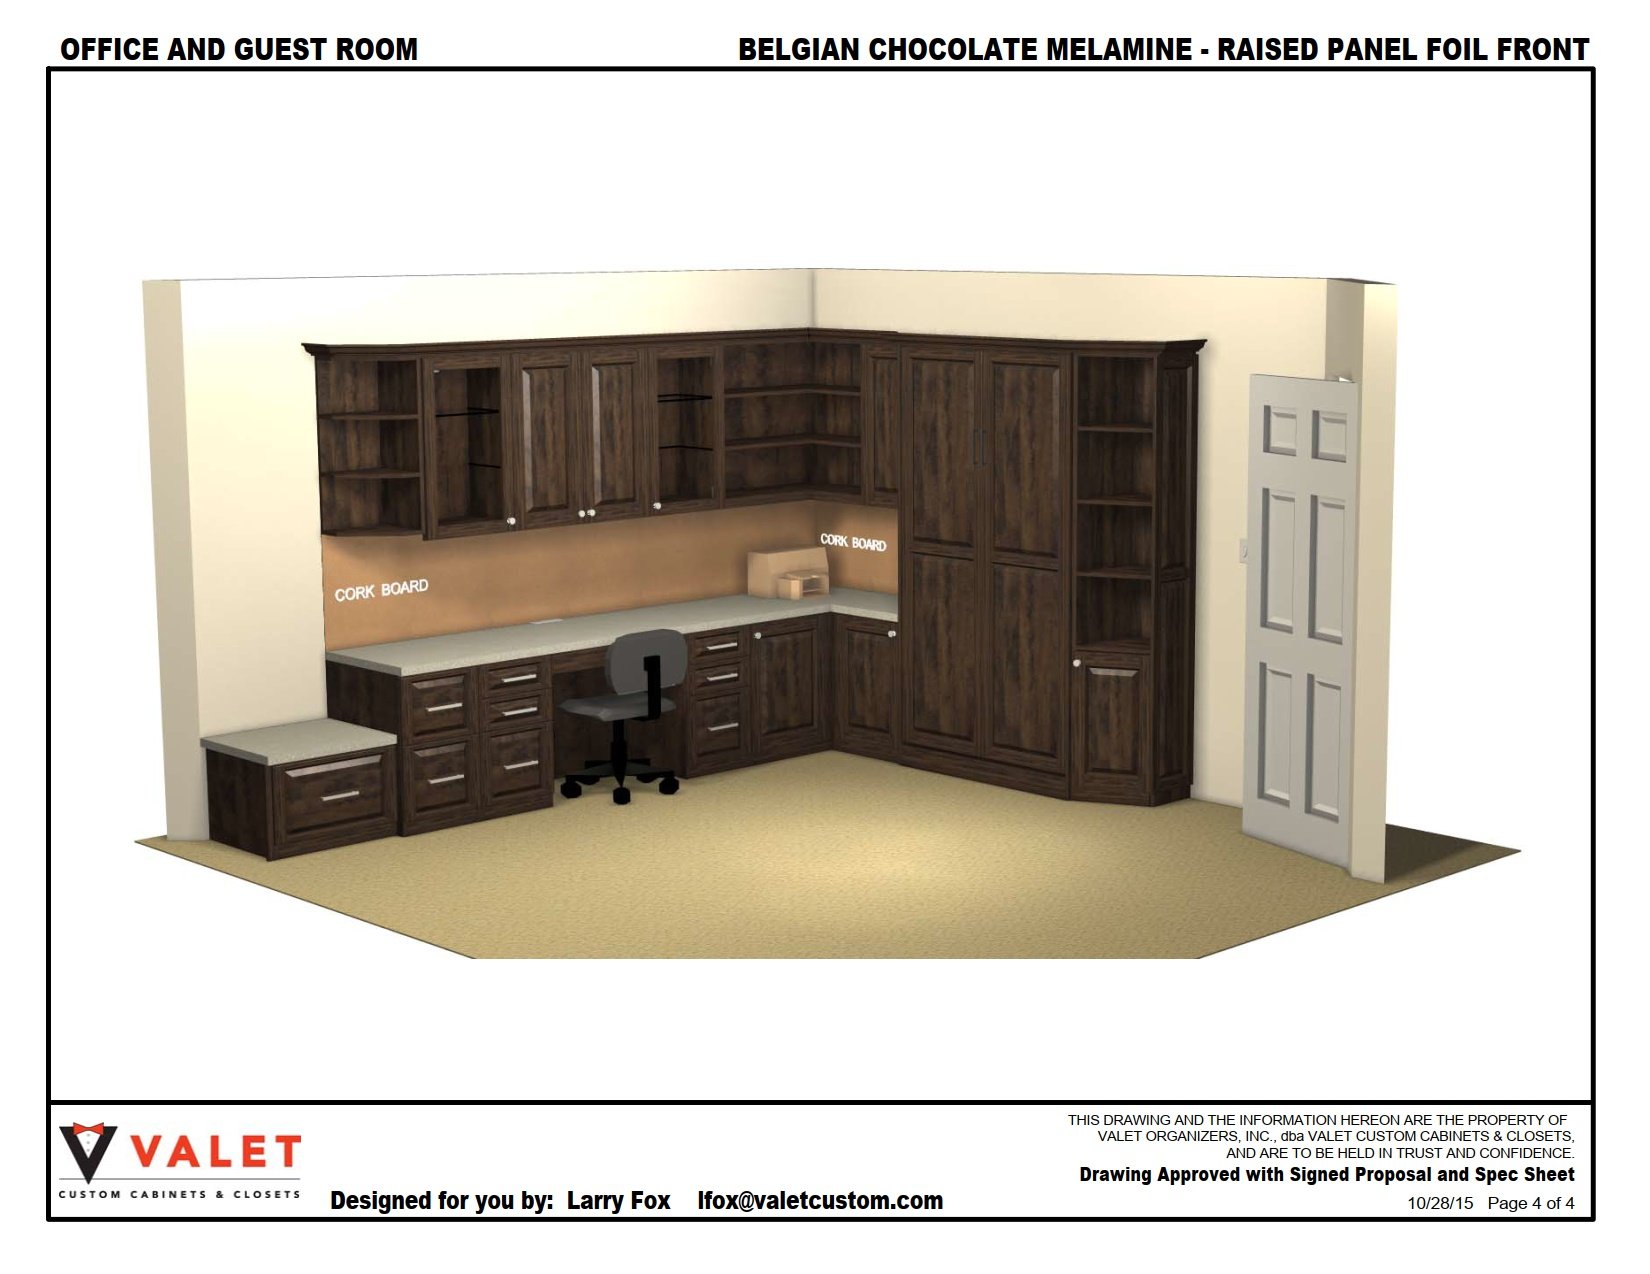 Office and Guest Room by Valet Custom Cabinets & Closets